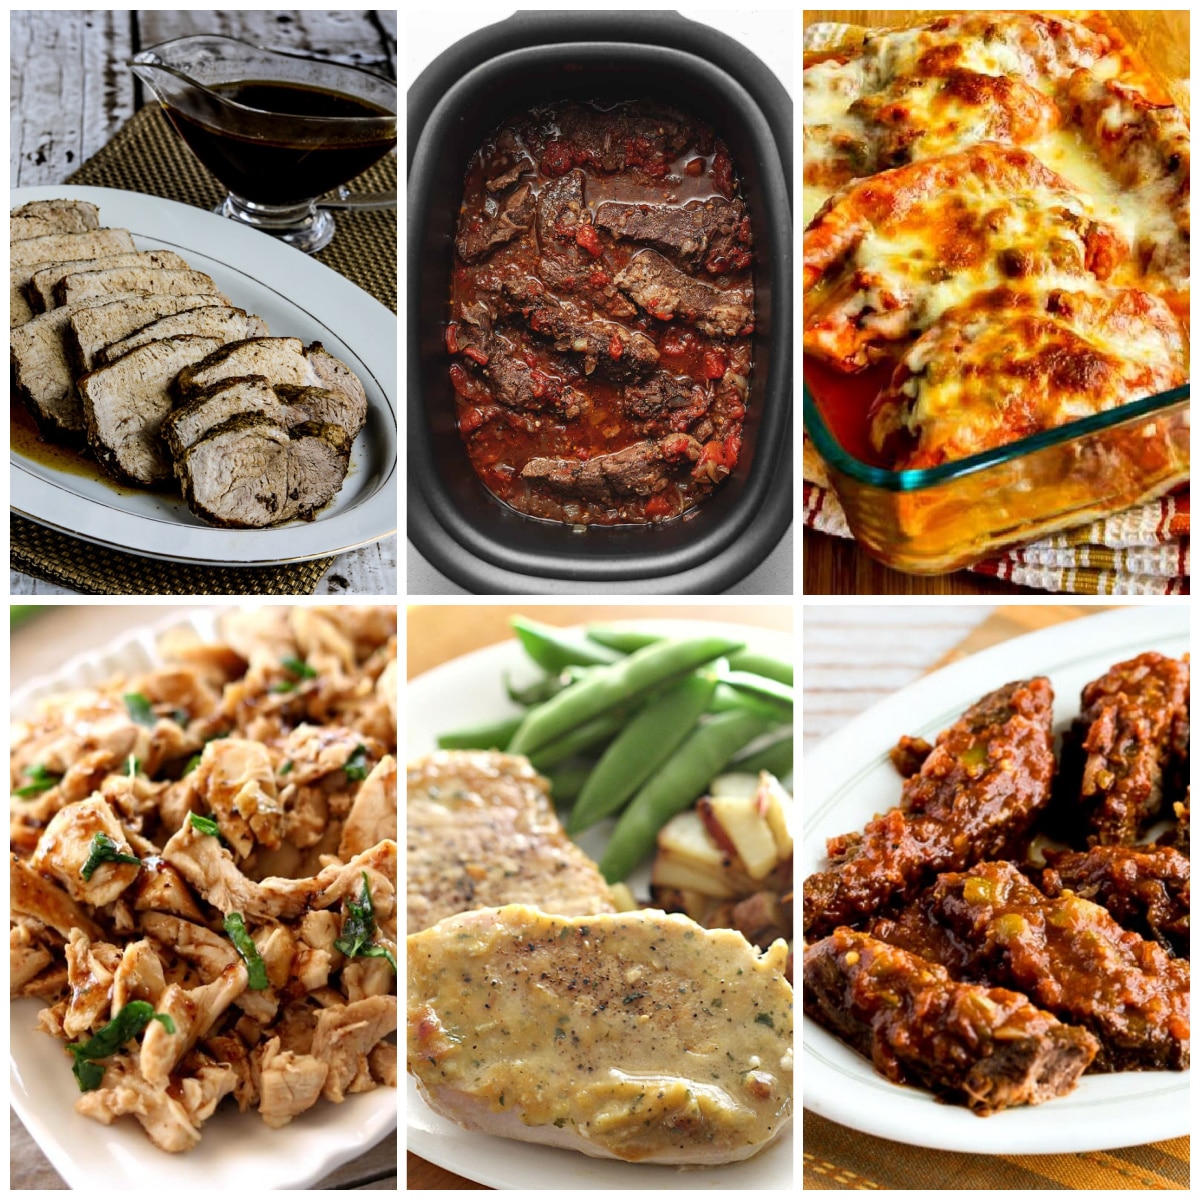 Amazing Five Ingredient Slow Cooker Dinners collage of featured recipes